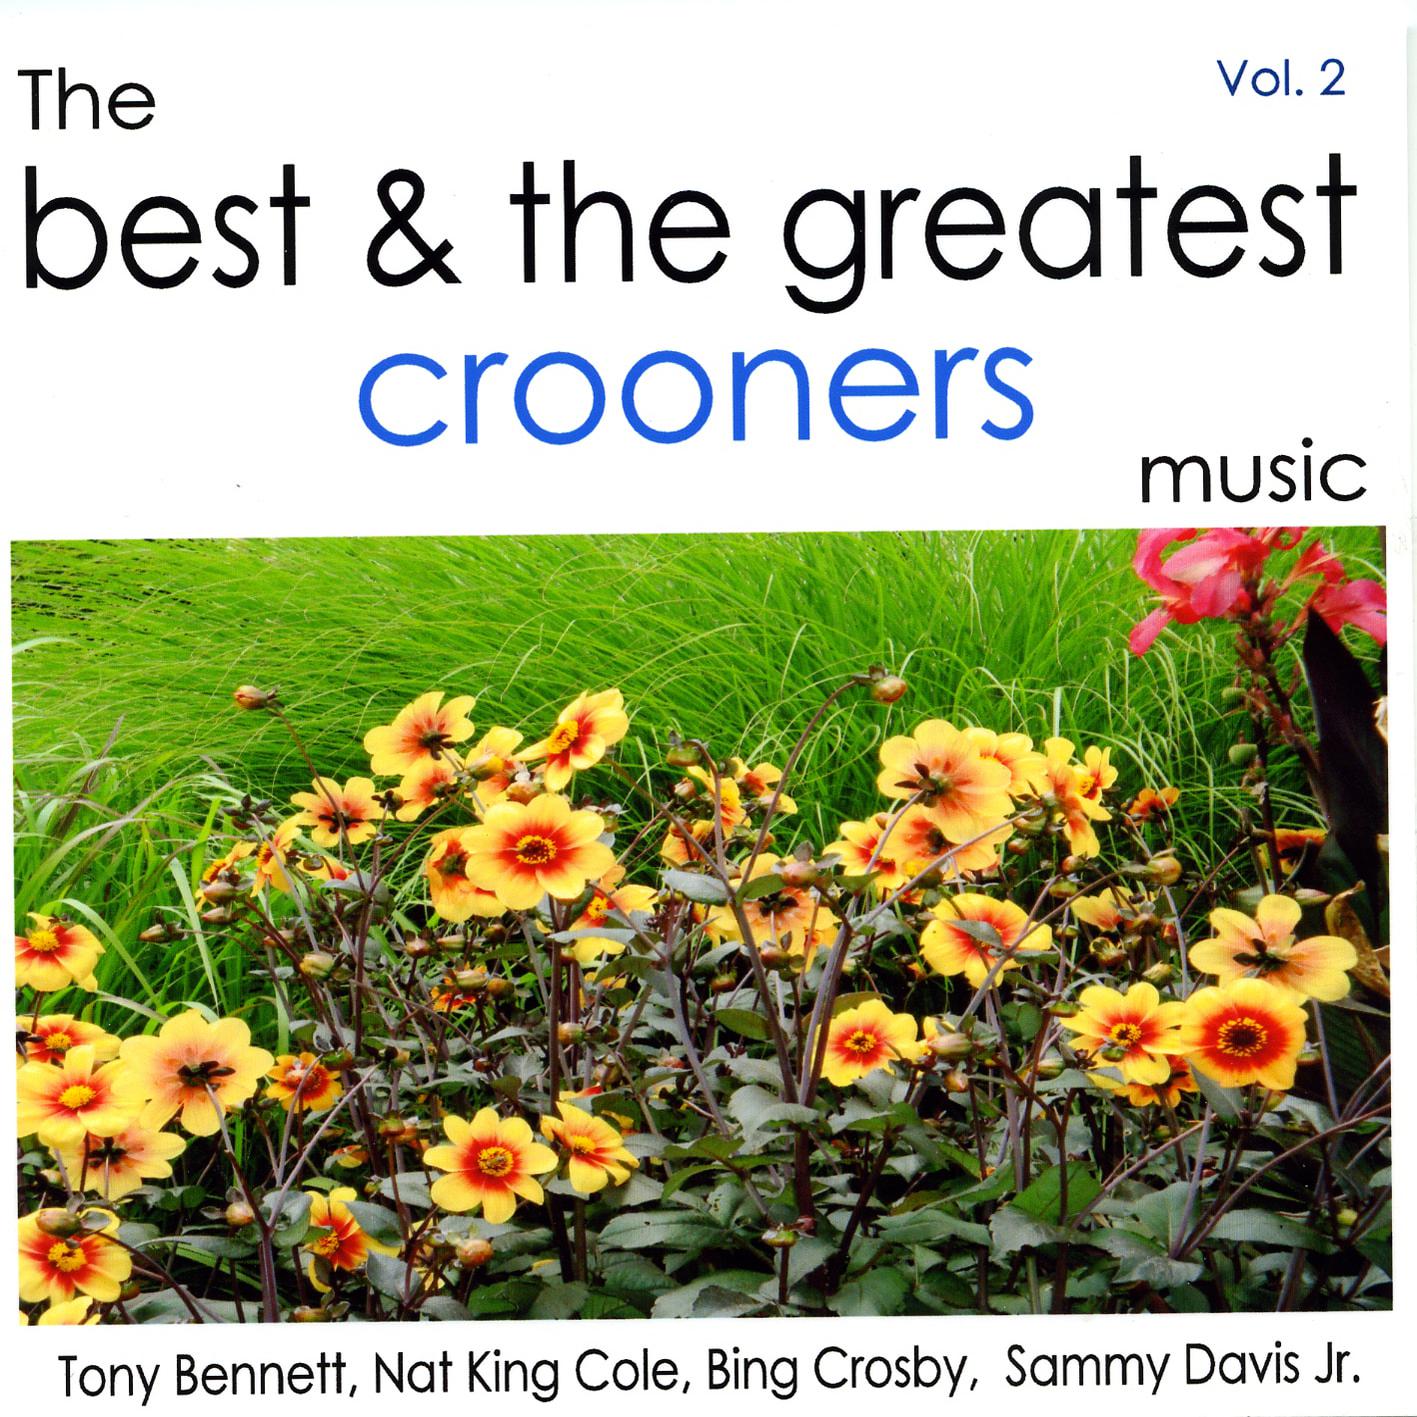 The Best and the Greatest Crooners Vol.2